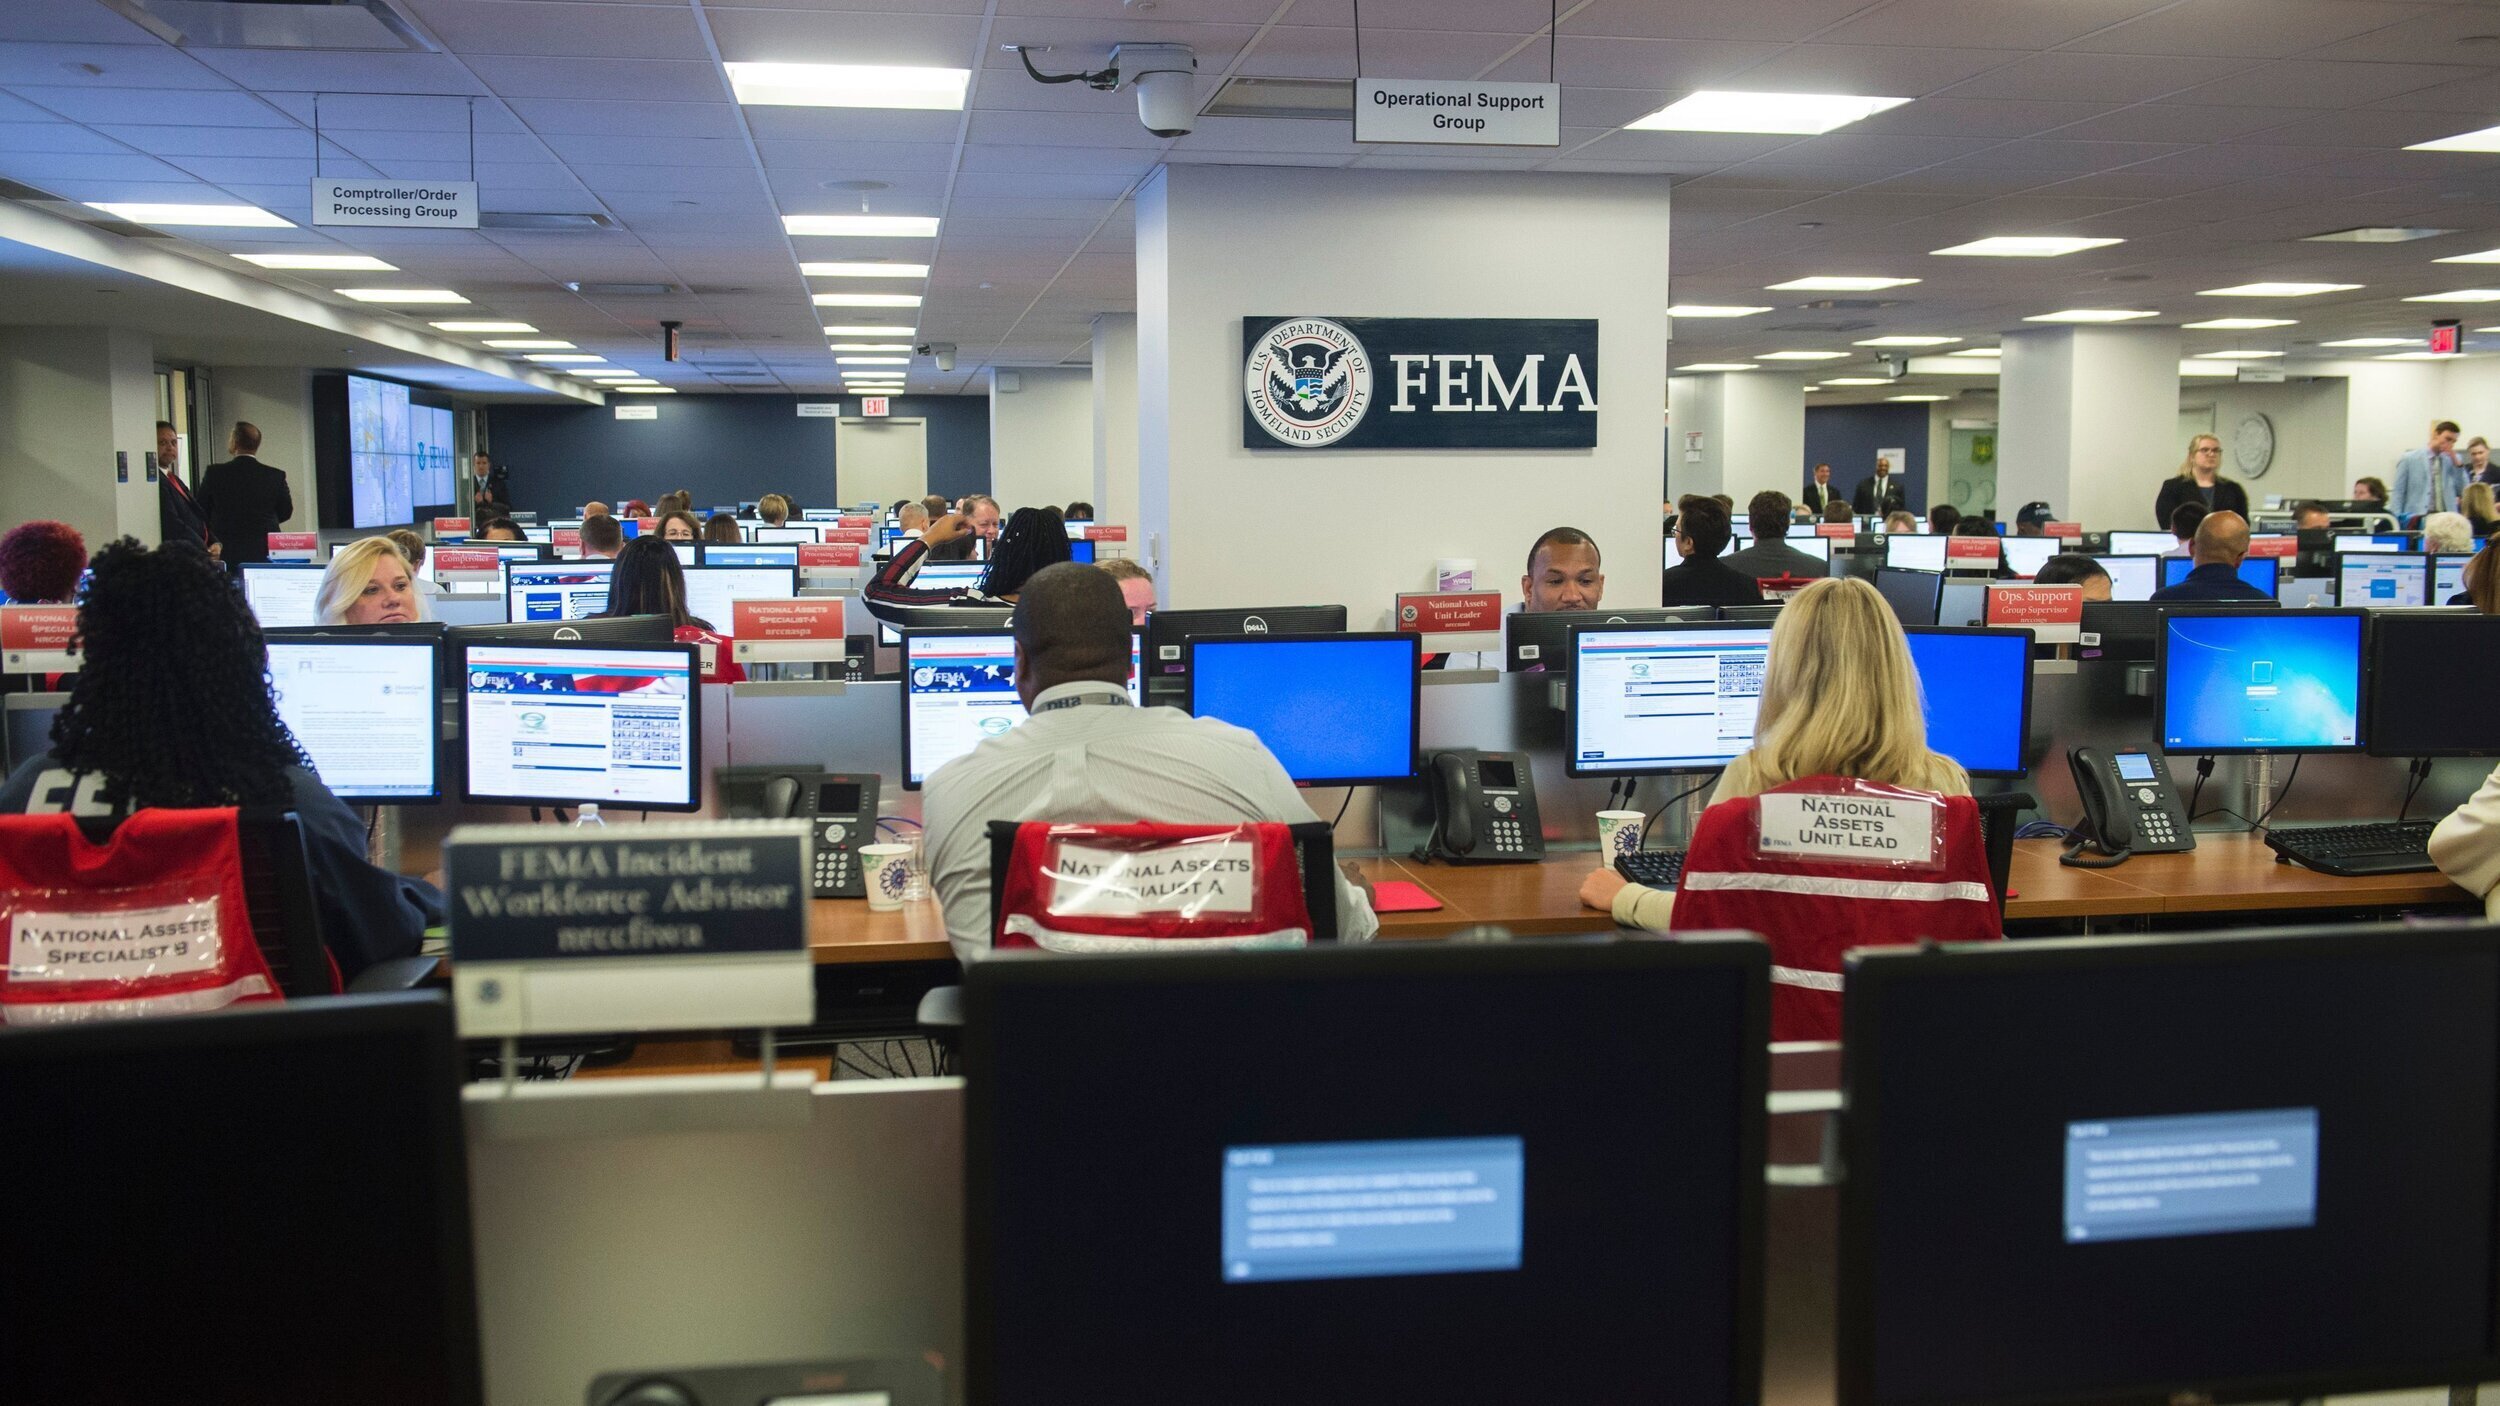 FEMA Information Security and Cloud Service Integration